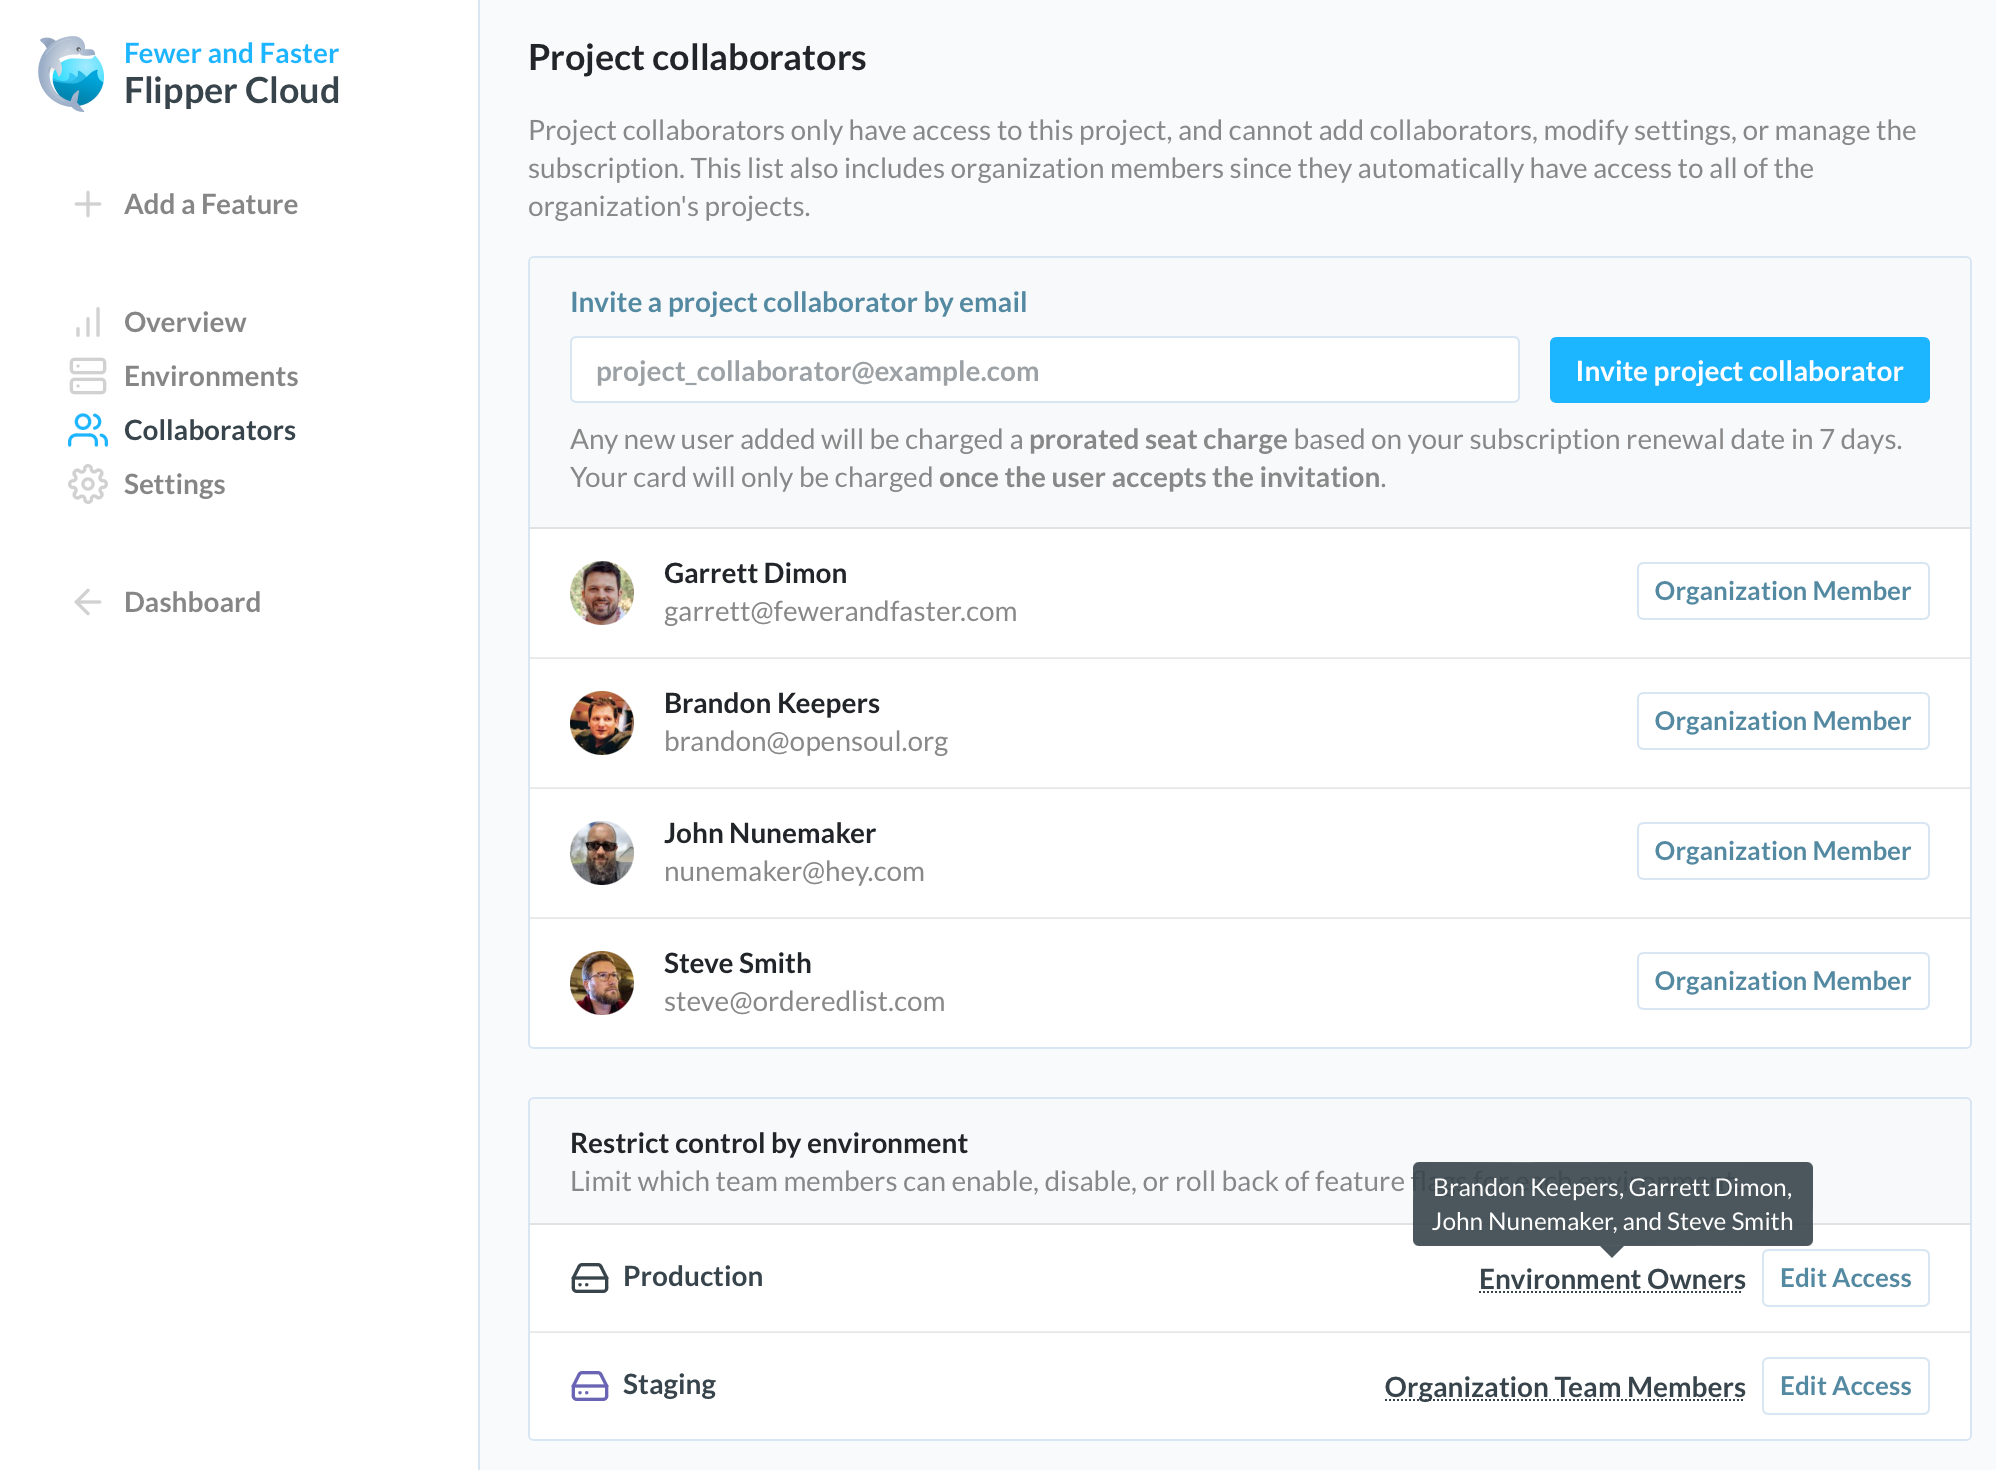 A screenshot of the project collaborators page in Flipper. Below the list of team members, a block shows the list of shared environments and which team members can control flags for that environment along with a link to edit the access controls.